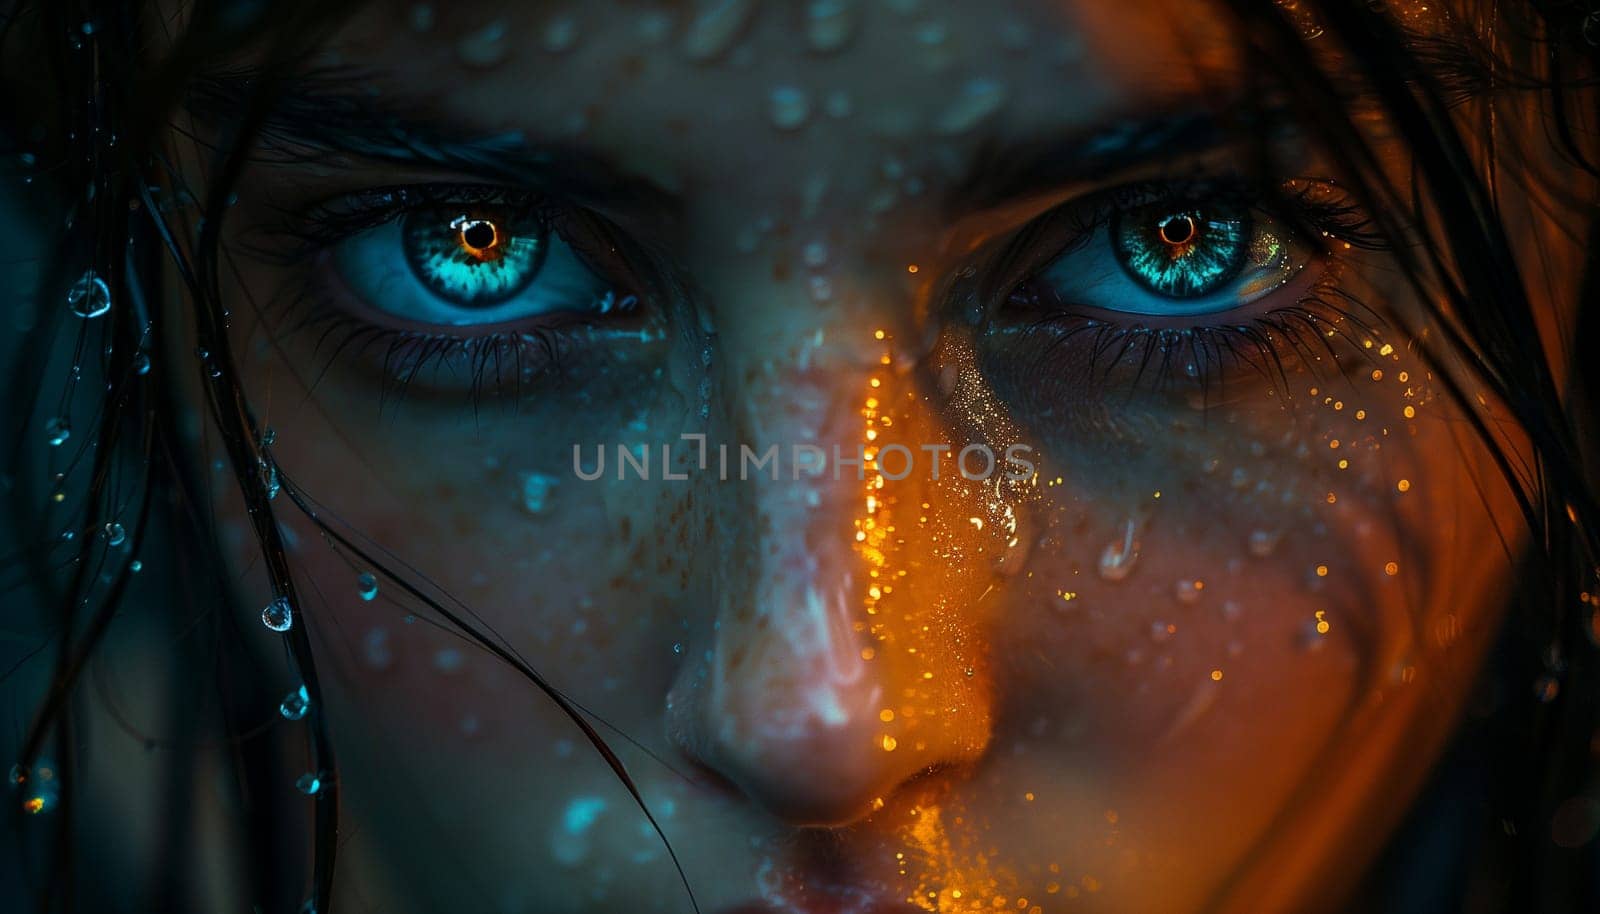 Colorful cinematic close-up photo of a girl's eyes by NeuroSky